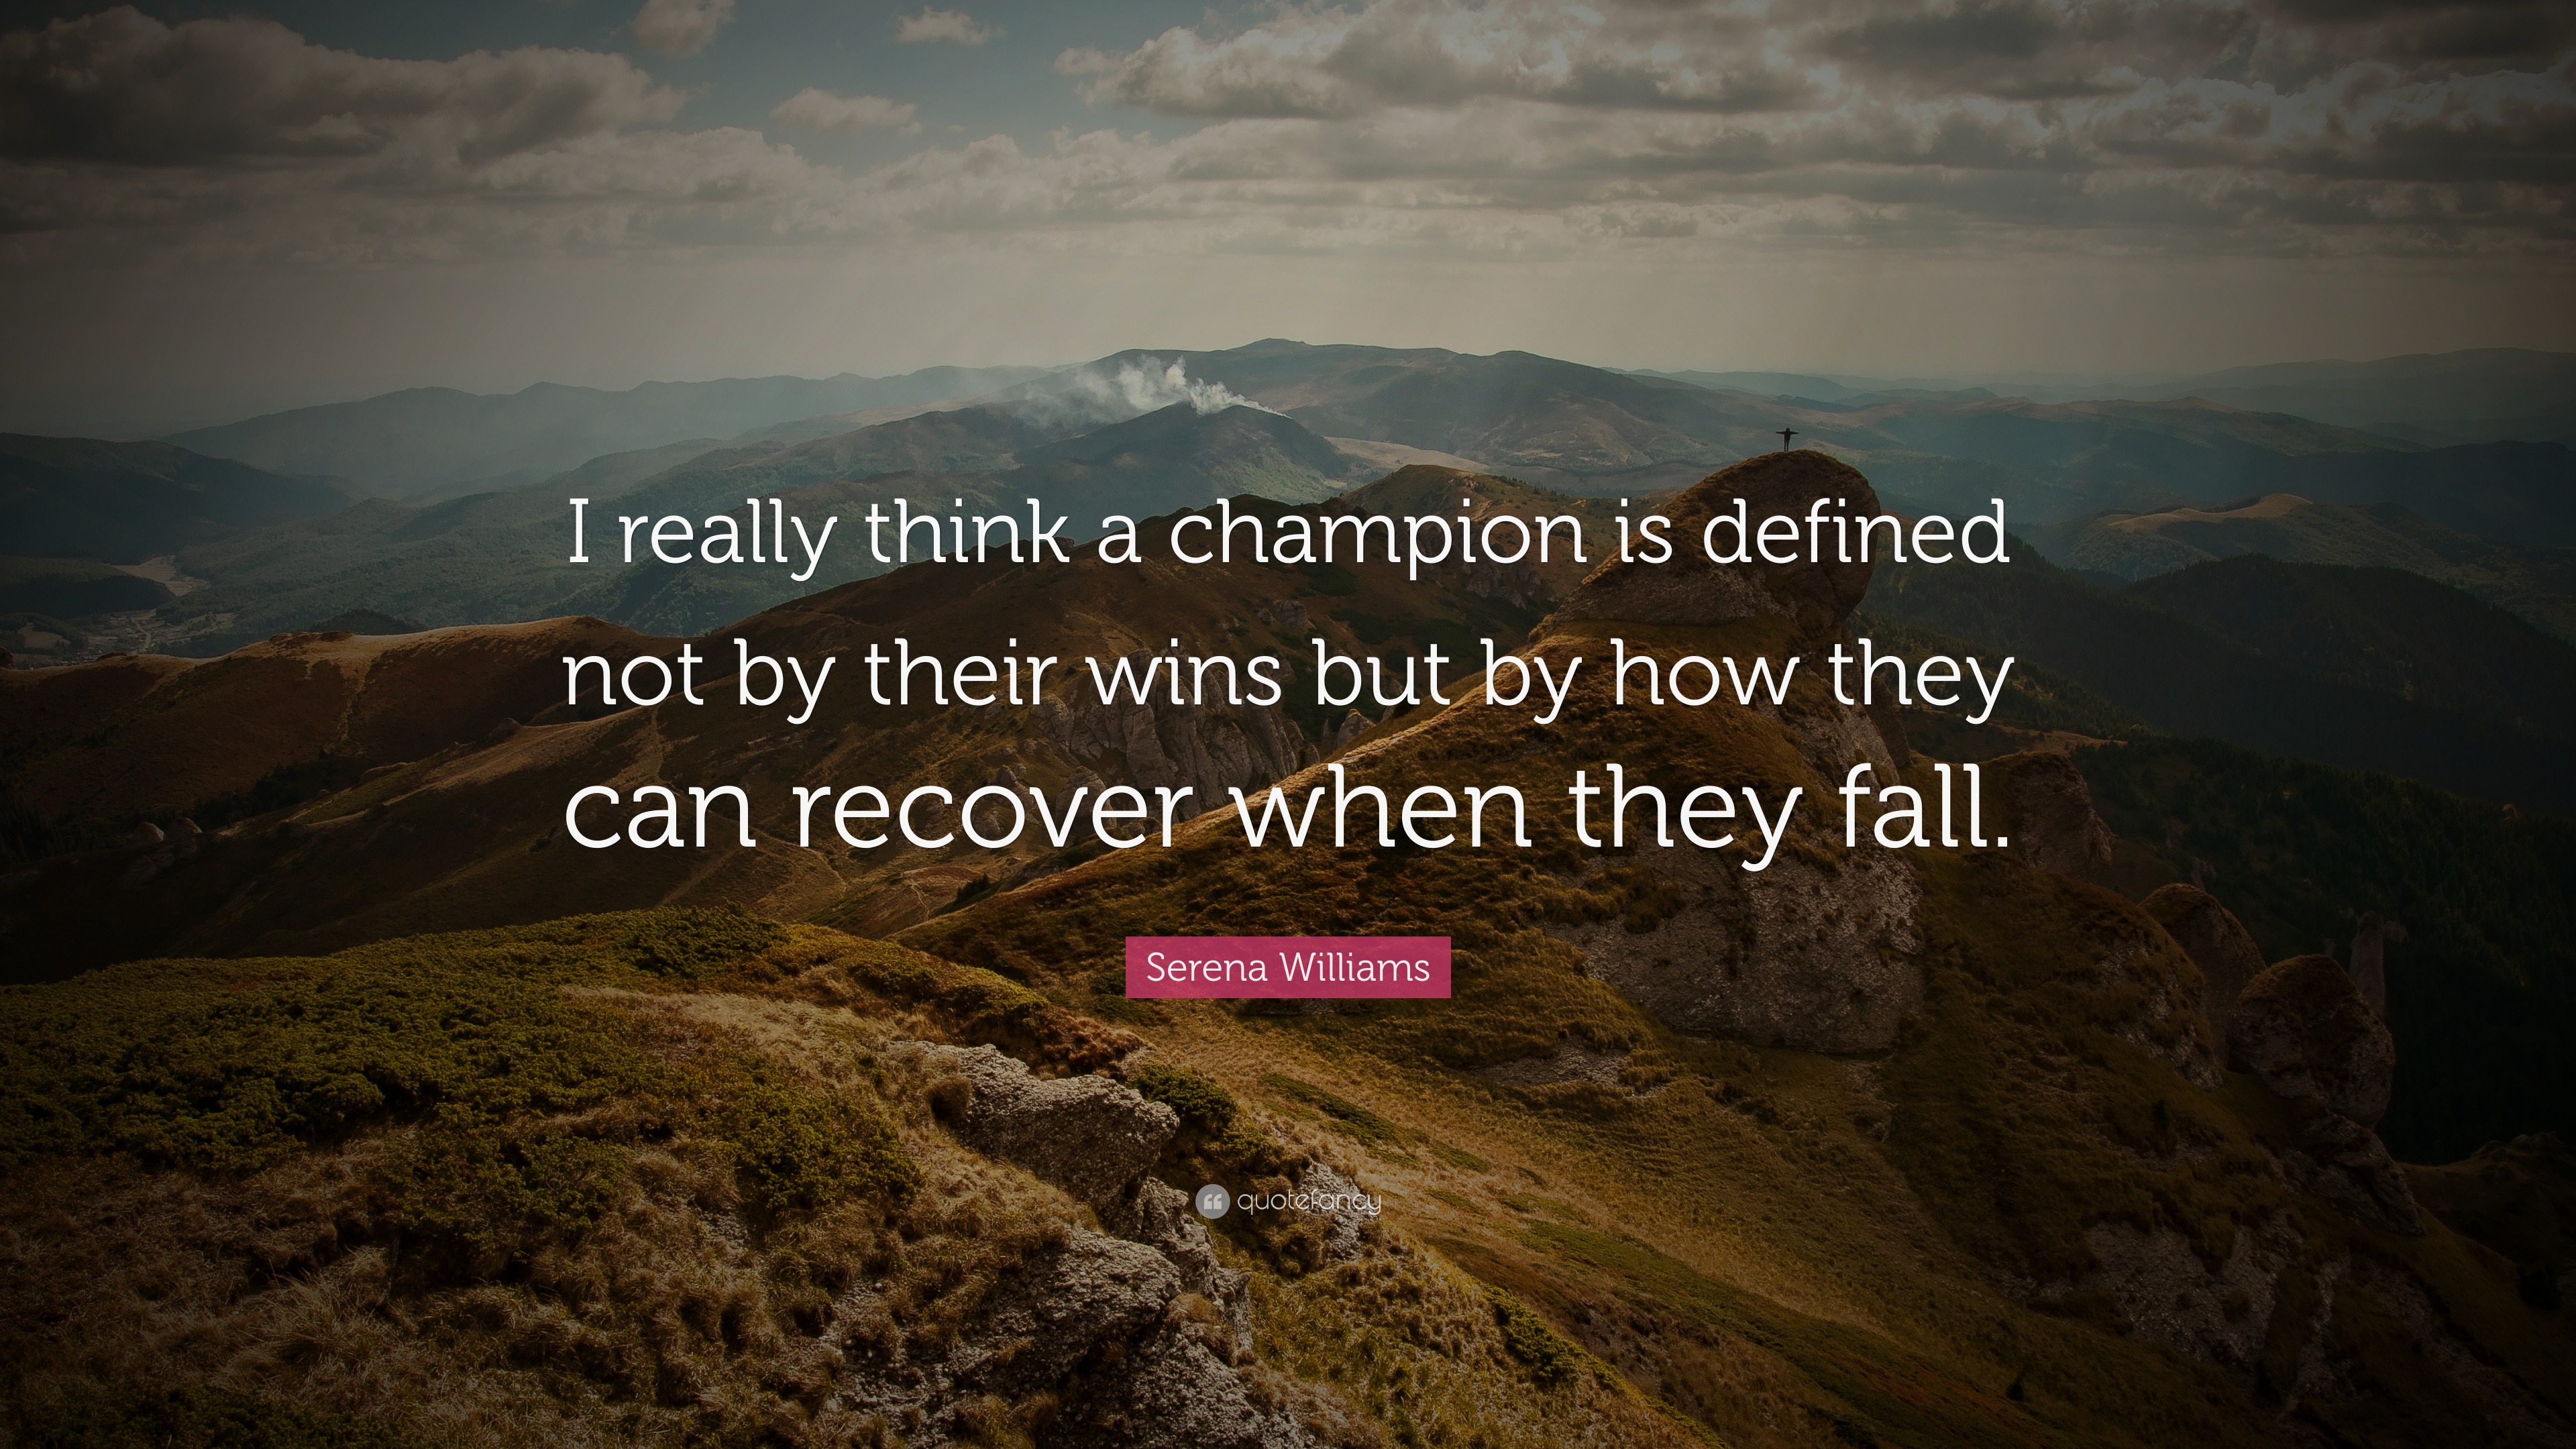 Serena Williams Quote: “I really think a champion is defined not by